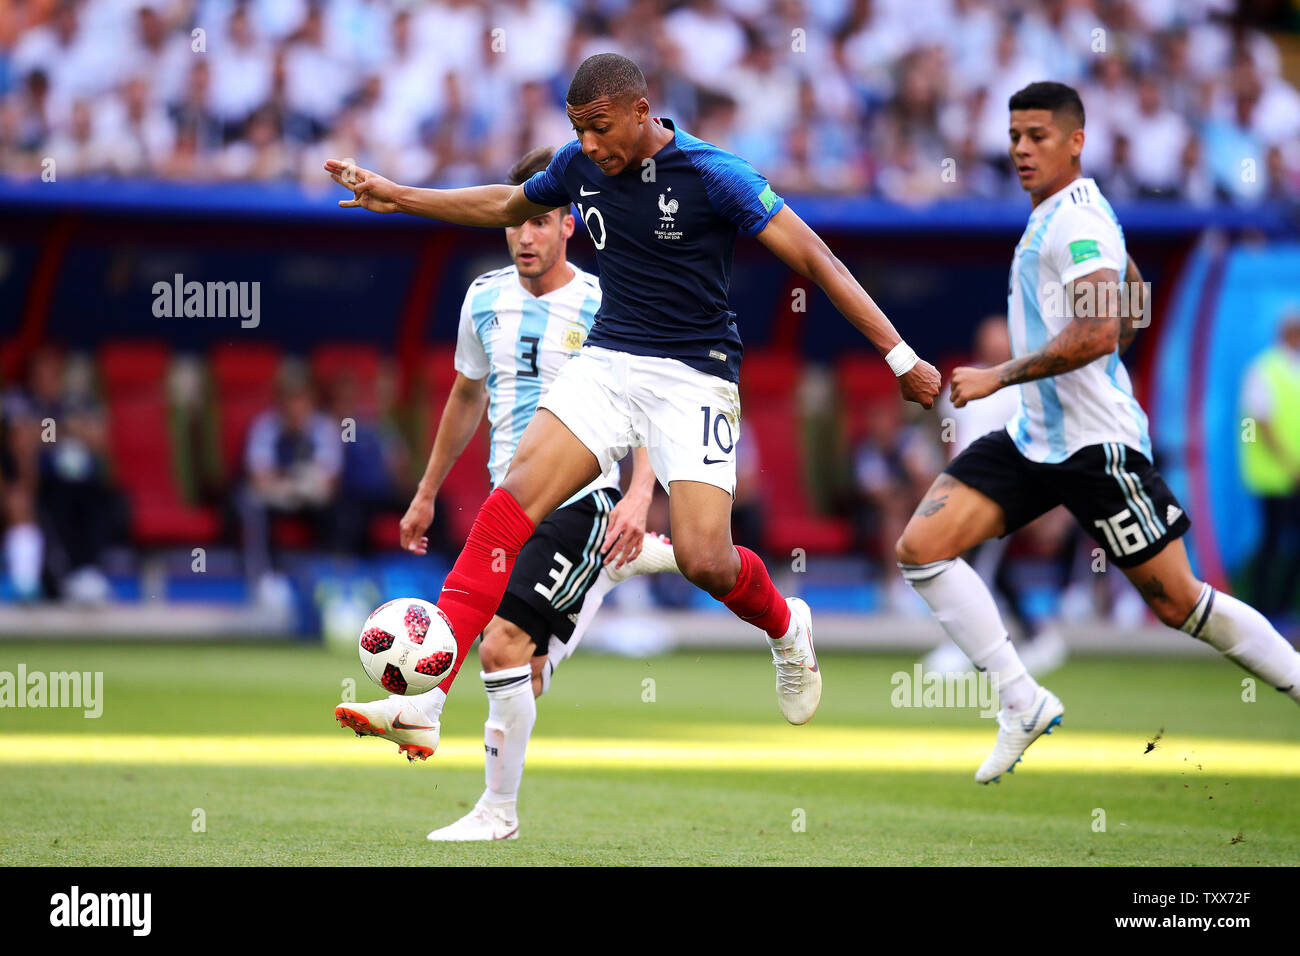 Kylian Mbappe of France controls the ball during the 2018 FIFA World Cup Round of 16 match at Kazan Arena in Kazan, Russia on June 30, 2018. France beat Argentina 4-3 to qualify for the quarter-finals. Photo by Chris Brunskill/UPI Stock Photo